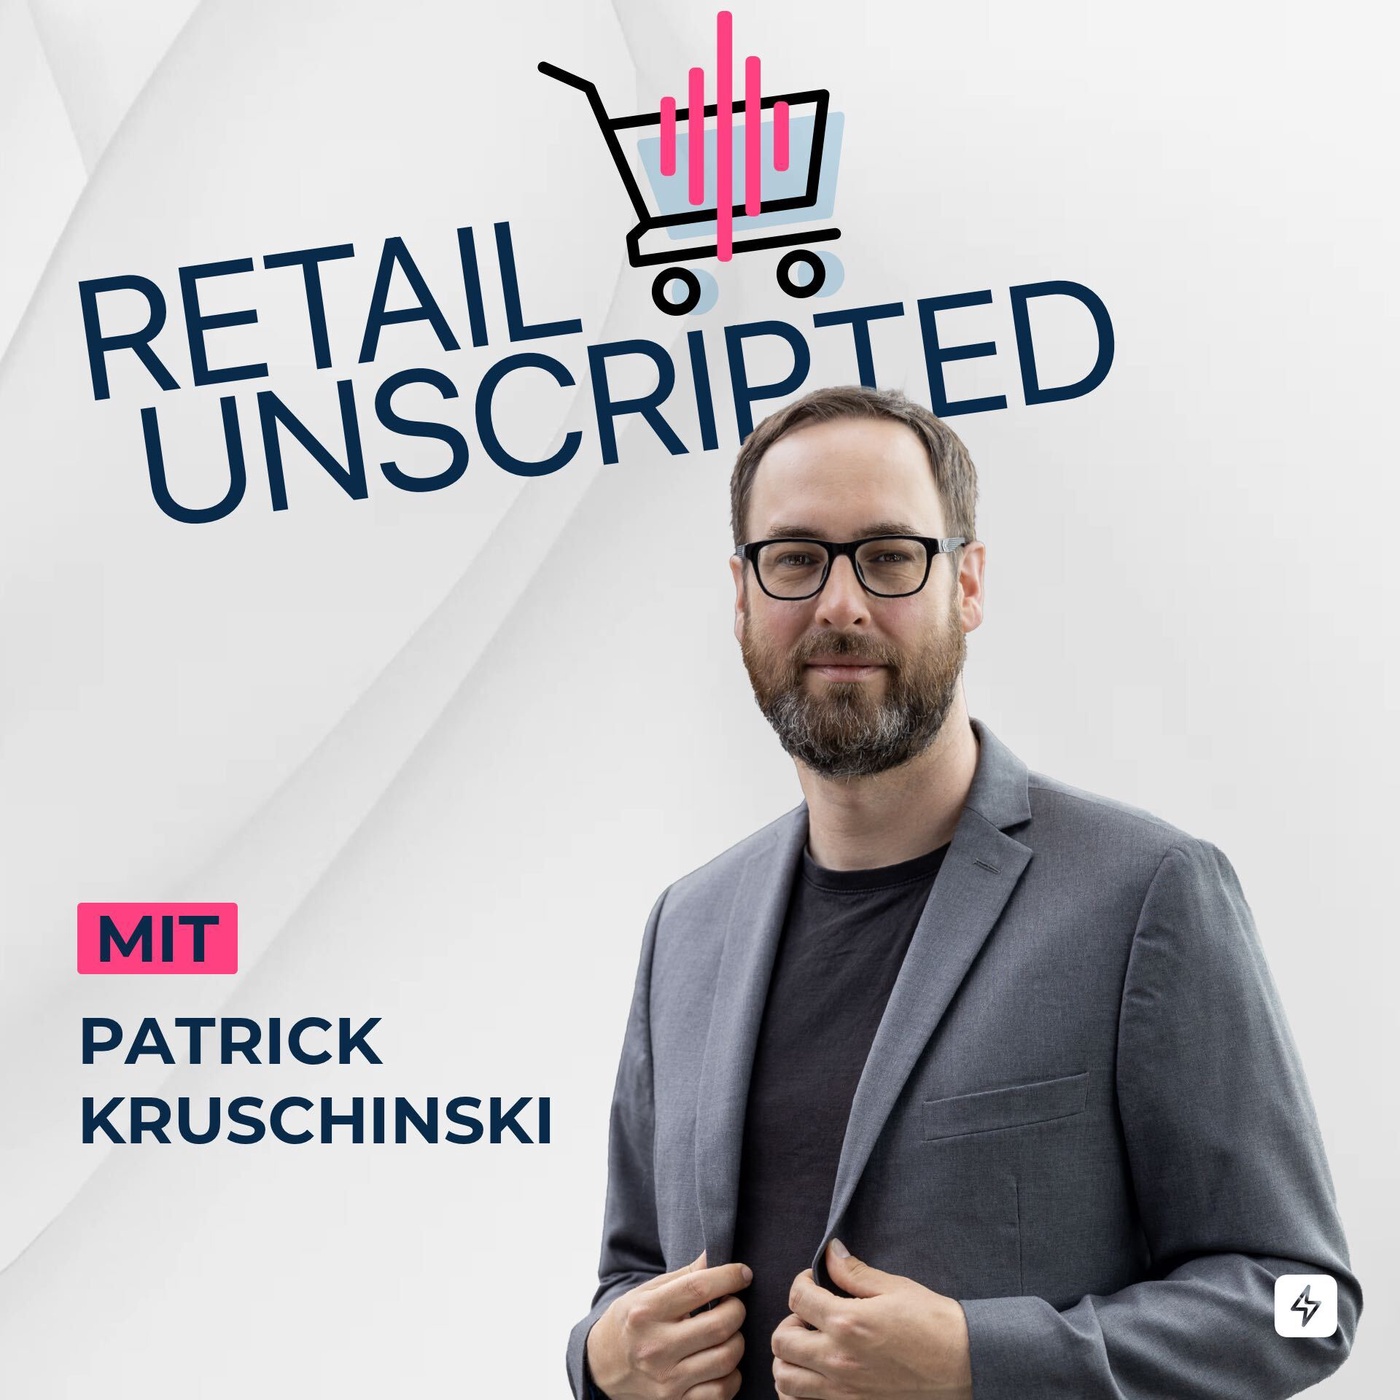 Retail Unscripted